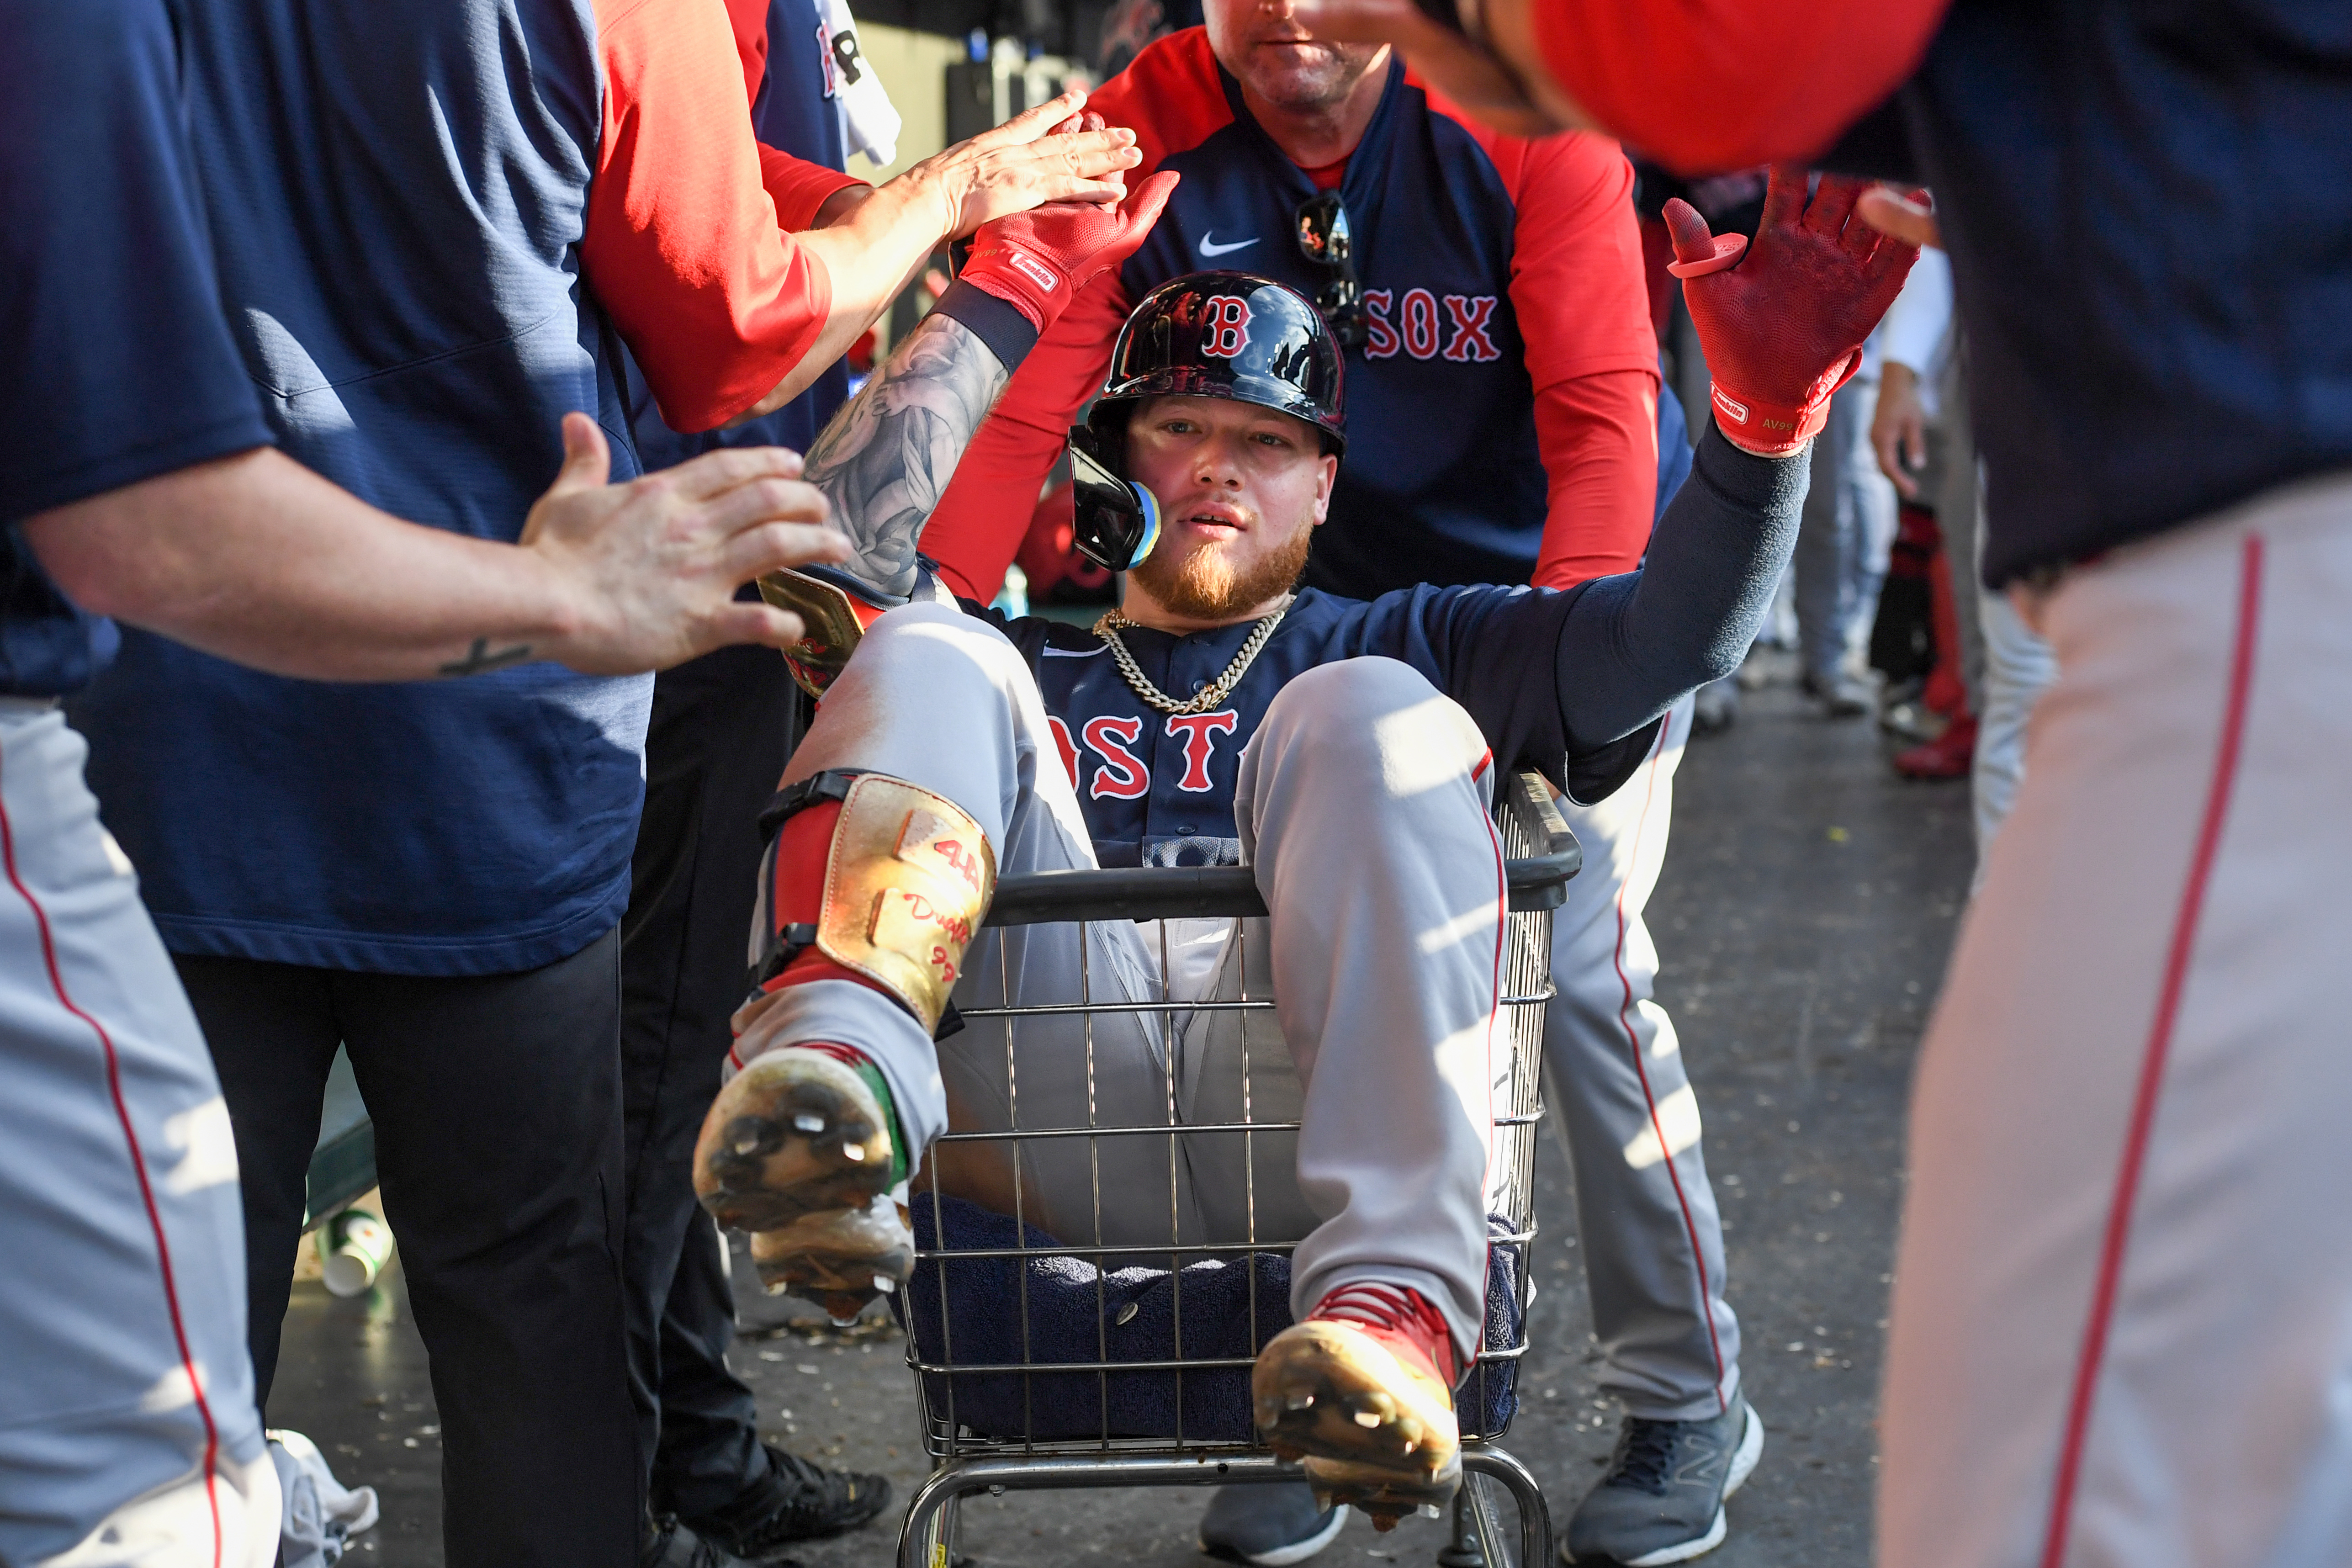 Alex Verdugo has seen his fair share of criticism, but he's finally tapping  into his full potential for the Red Sox - The Boston Globe